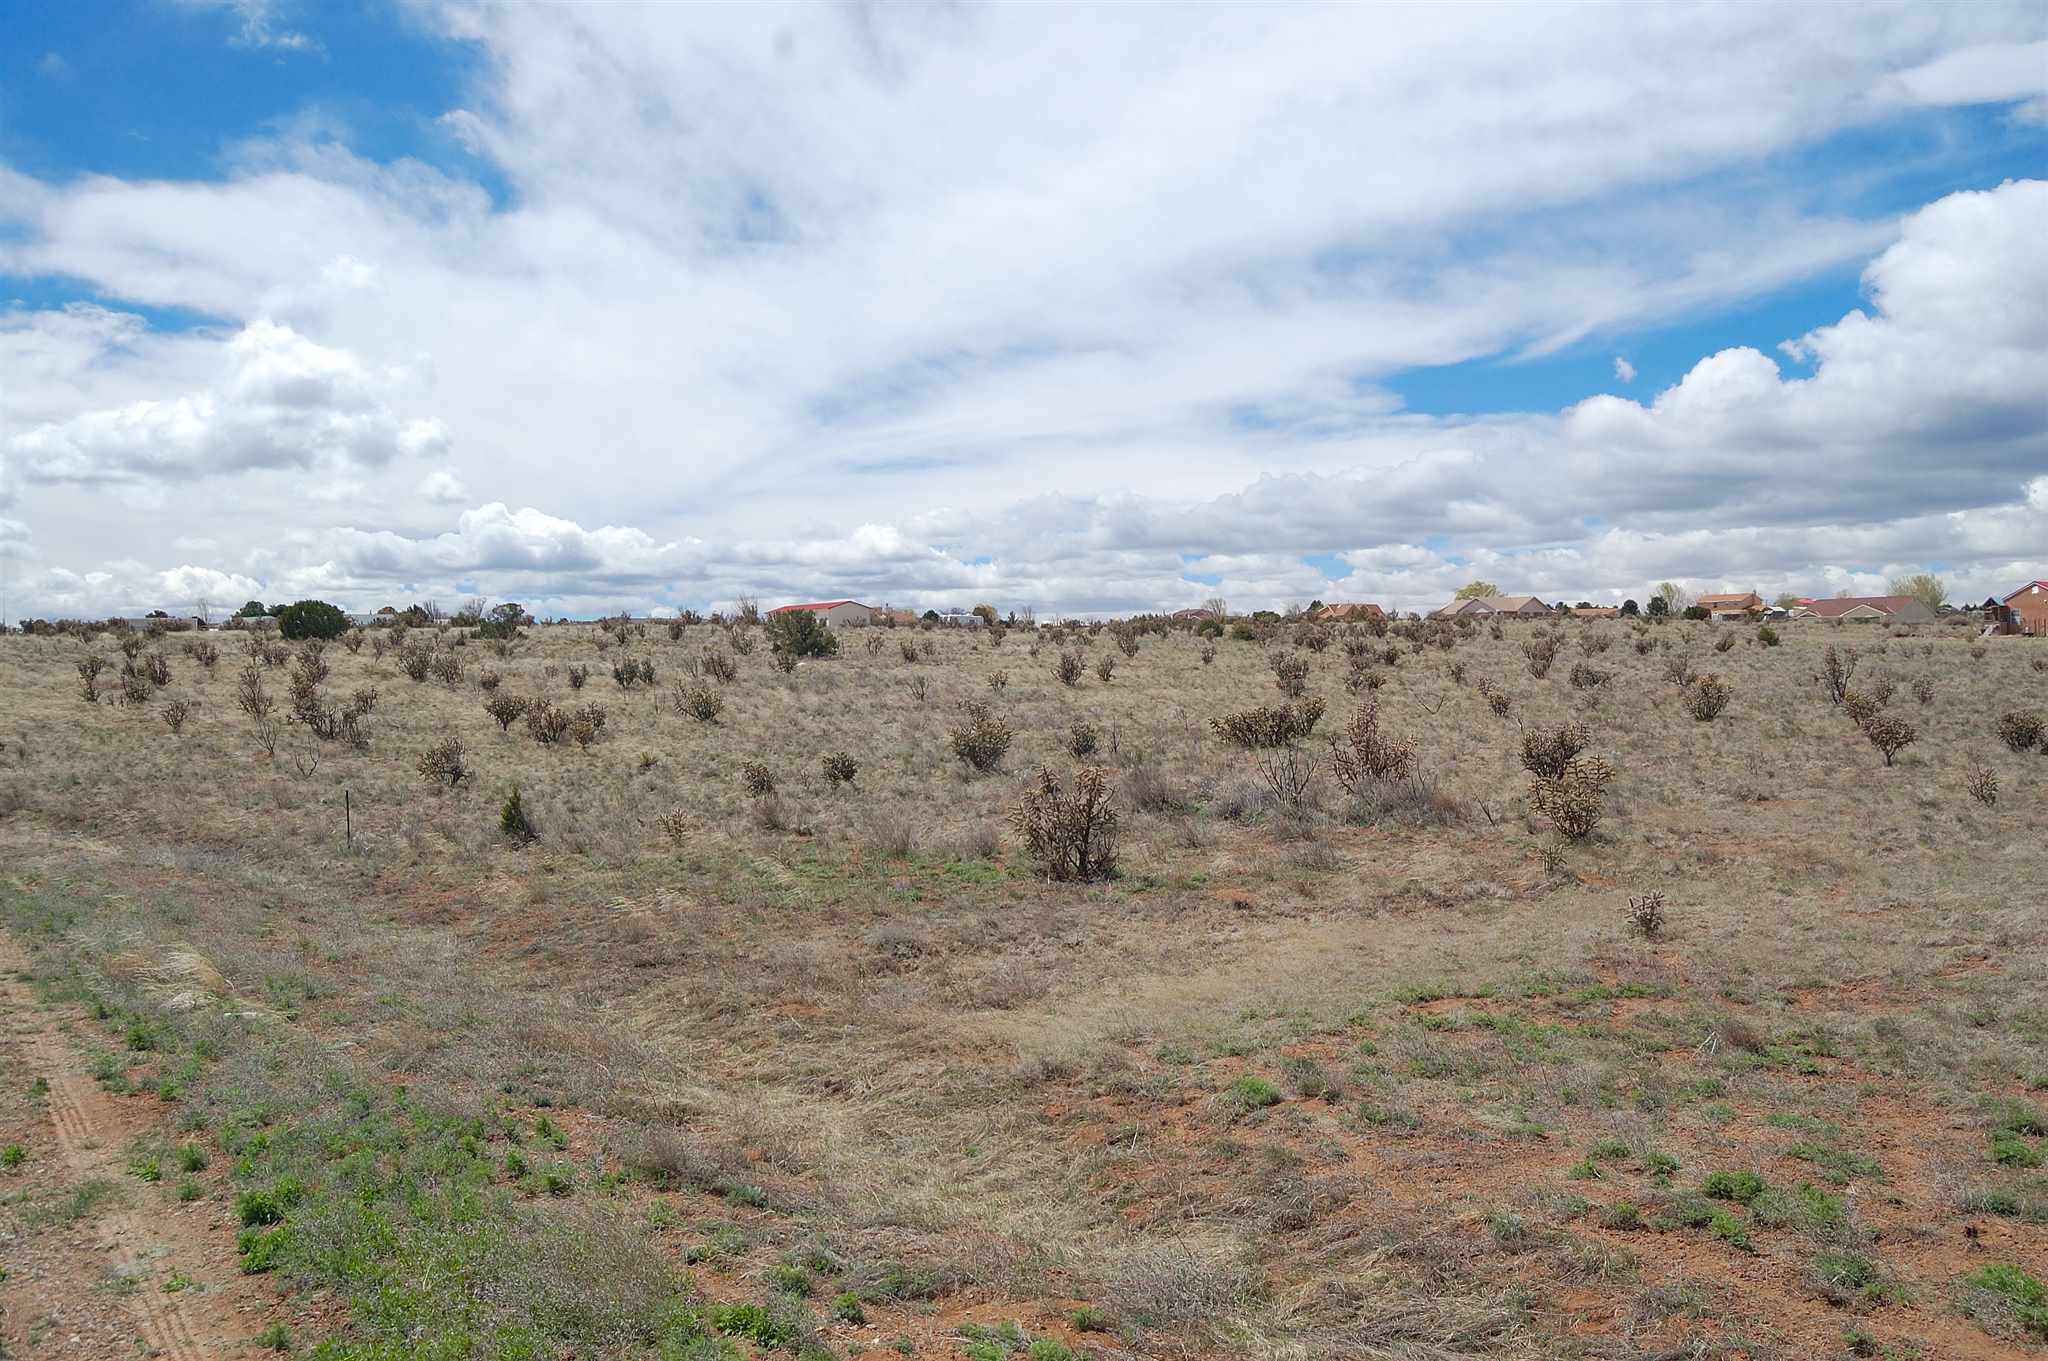 Lots 1-4 West Hill, Edgewood, New Mexico 87015, ,Land,For Sale,Lots 1-4 West Hill,201904858